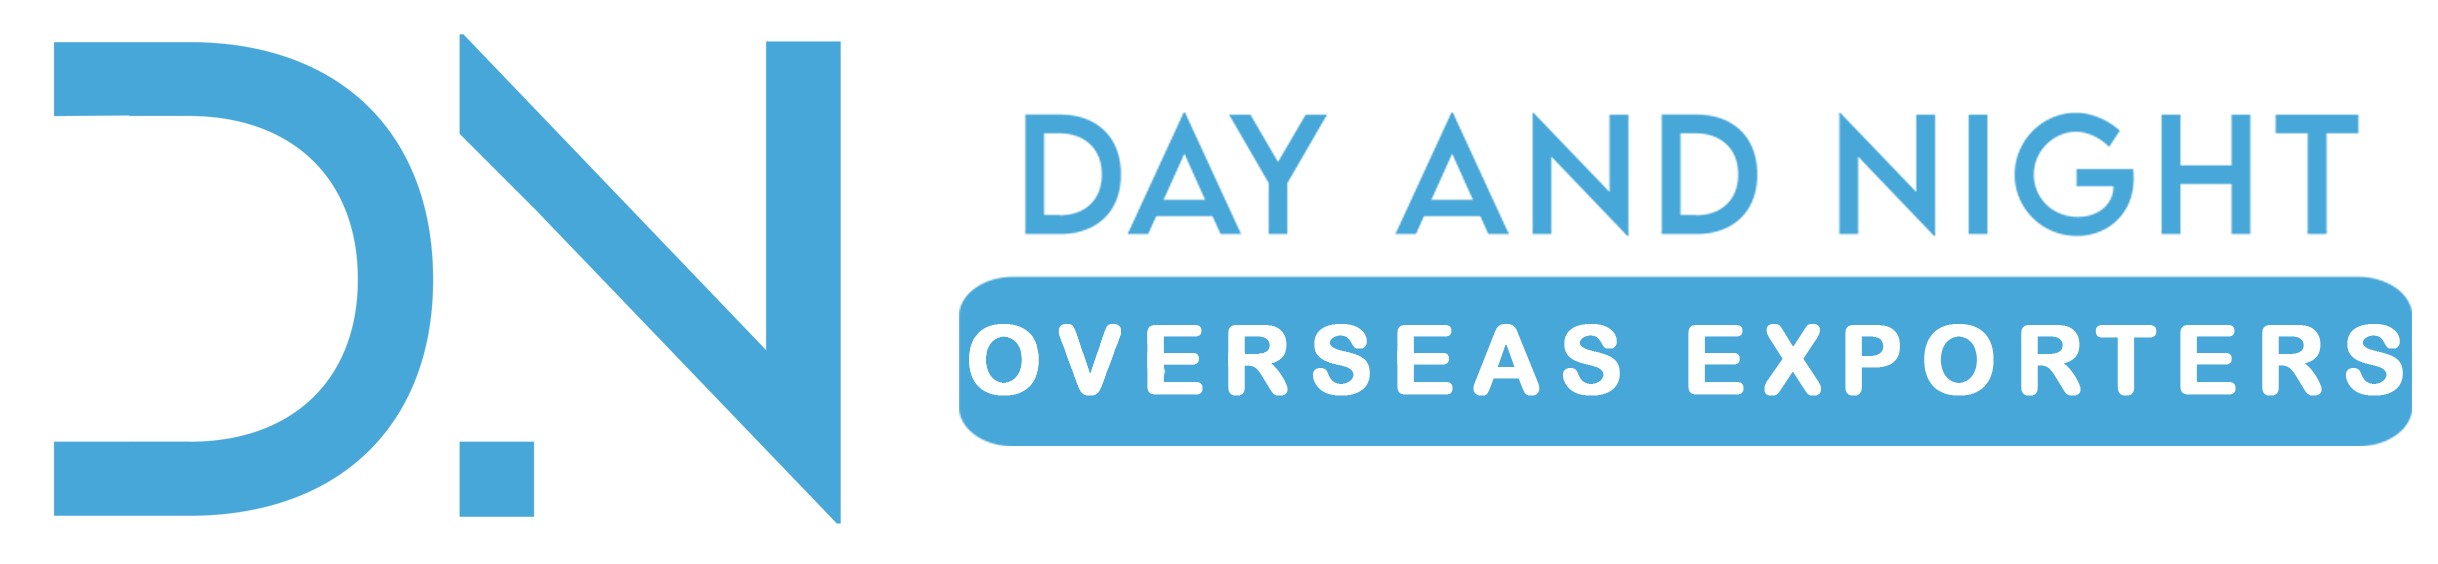 Day And Night Overseas Exporters